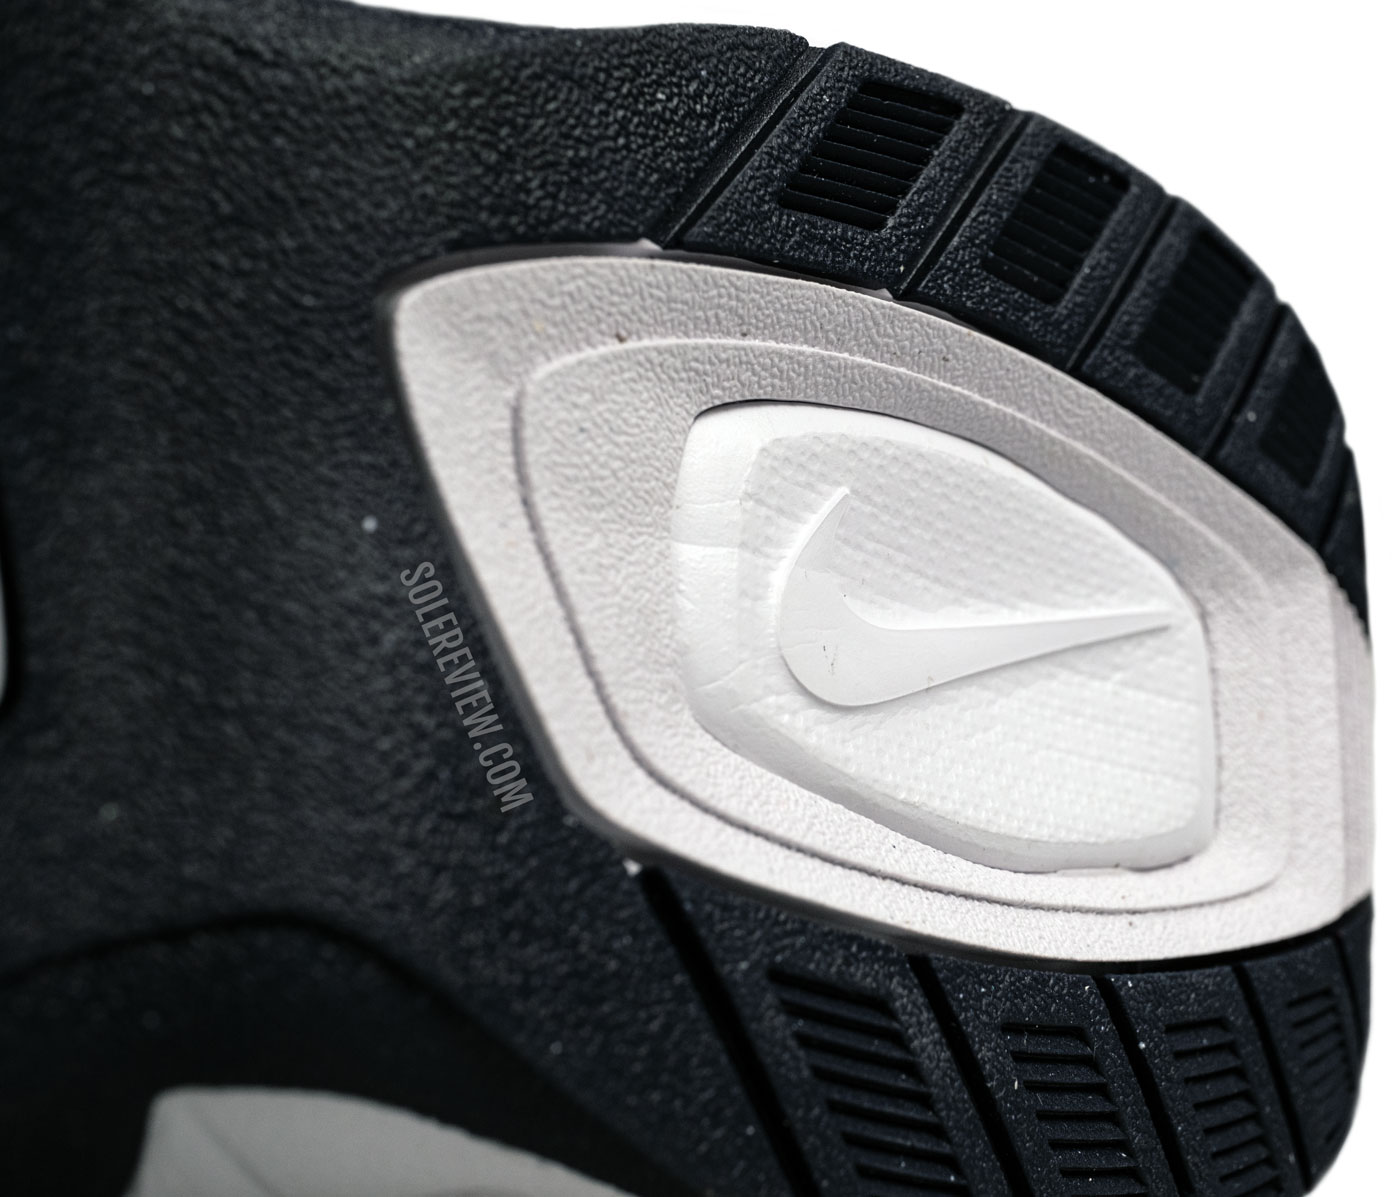 The soft heel window of the Nike Monarch IV.